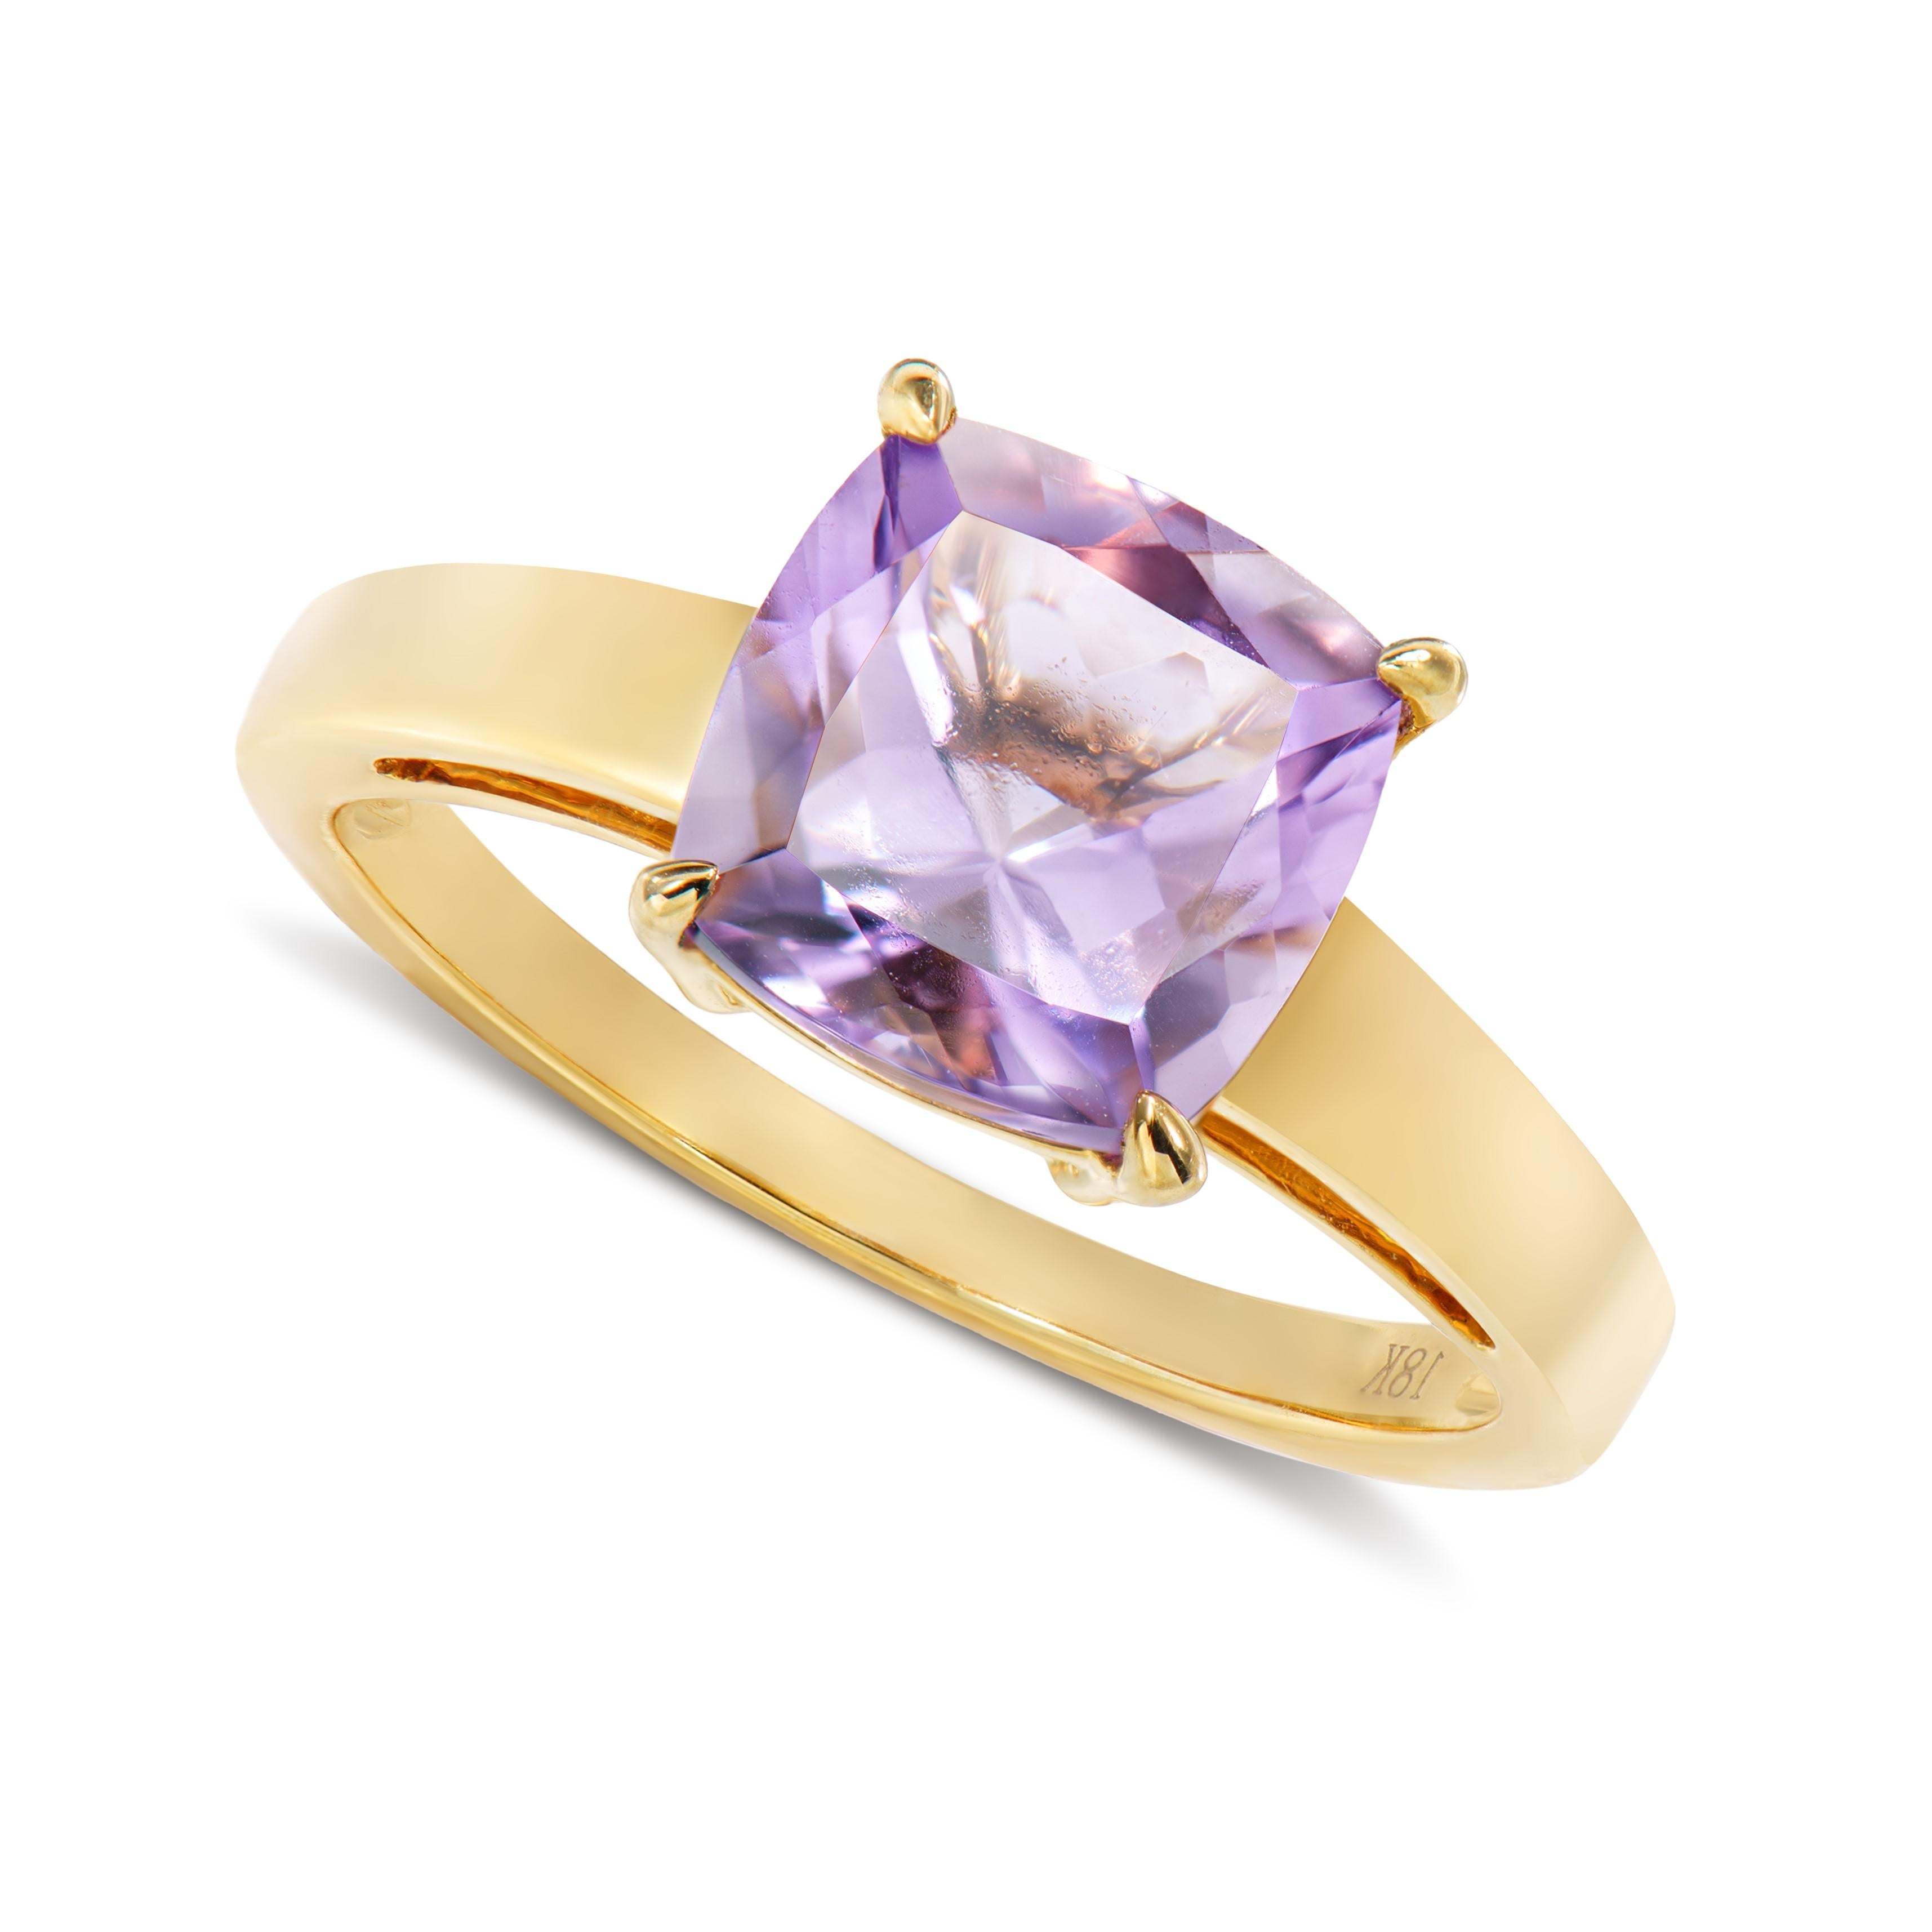 Contemporary 2.15 Carat Amethyst Fancy Ring in 18Karat Yellow Gold.   For Sale